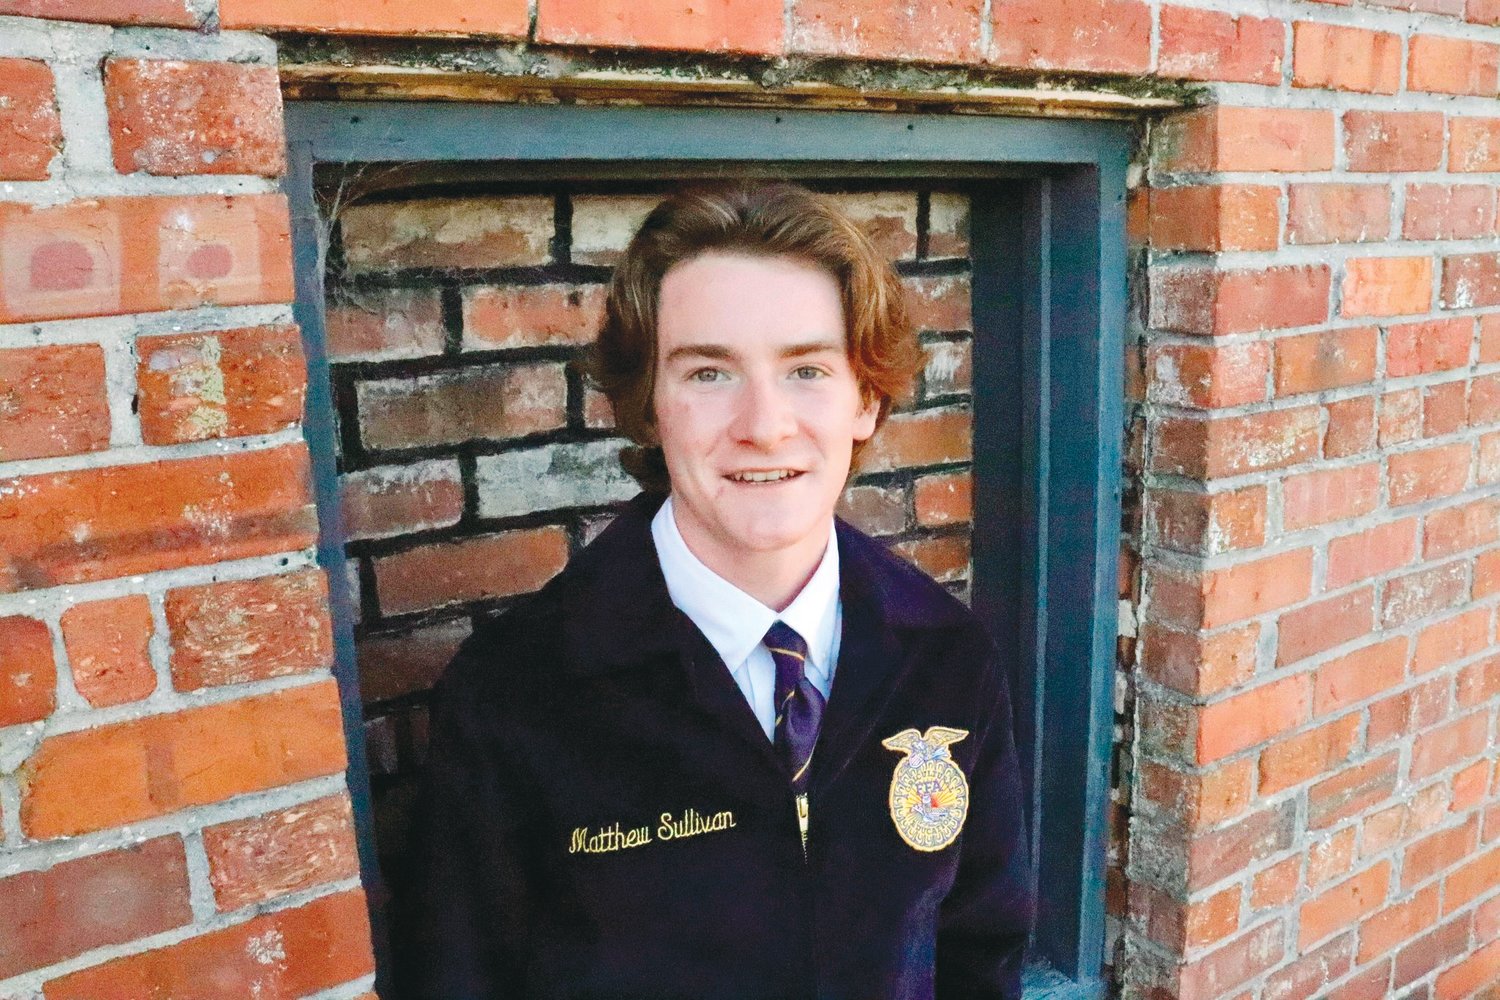 Matthew Sullivan, a Northwood junior and FFA member, received a scholarship to attend a national leadership conference in Washington, D.C., this summer. He's been involved in Northwood's FFA chapter since his first year of high school.